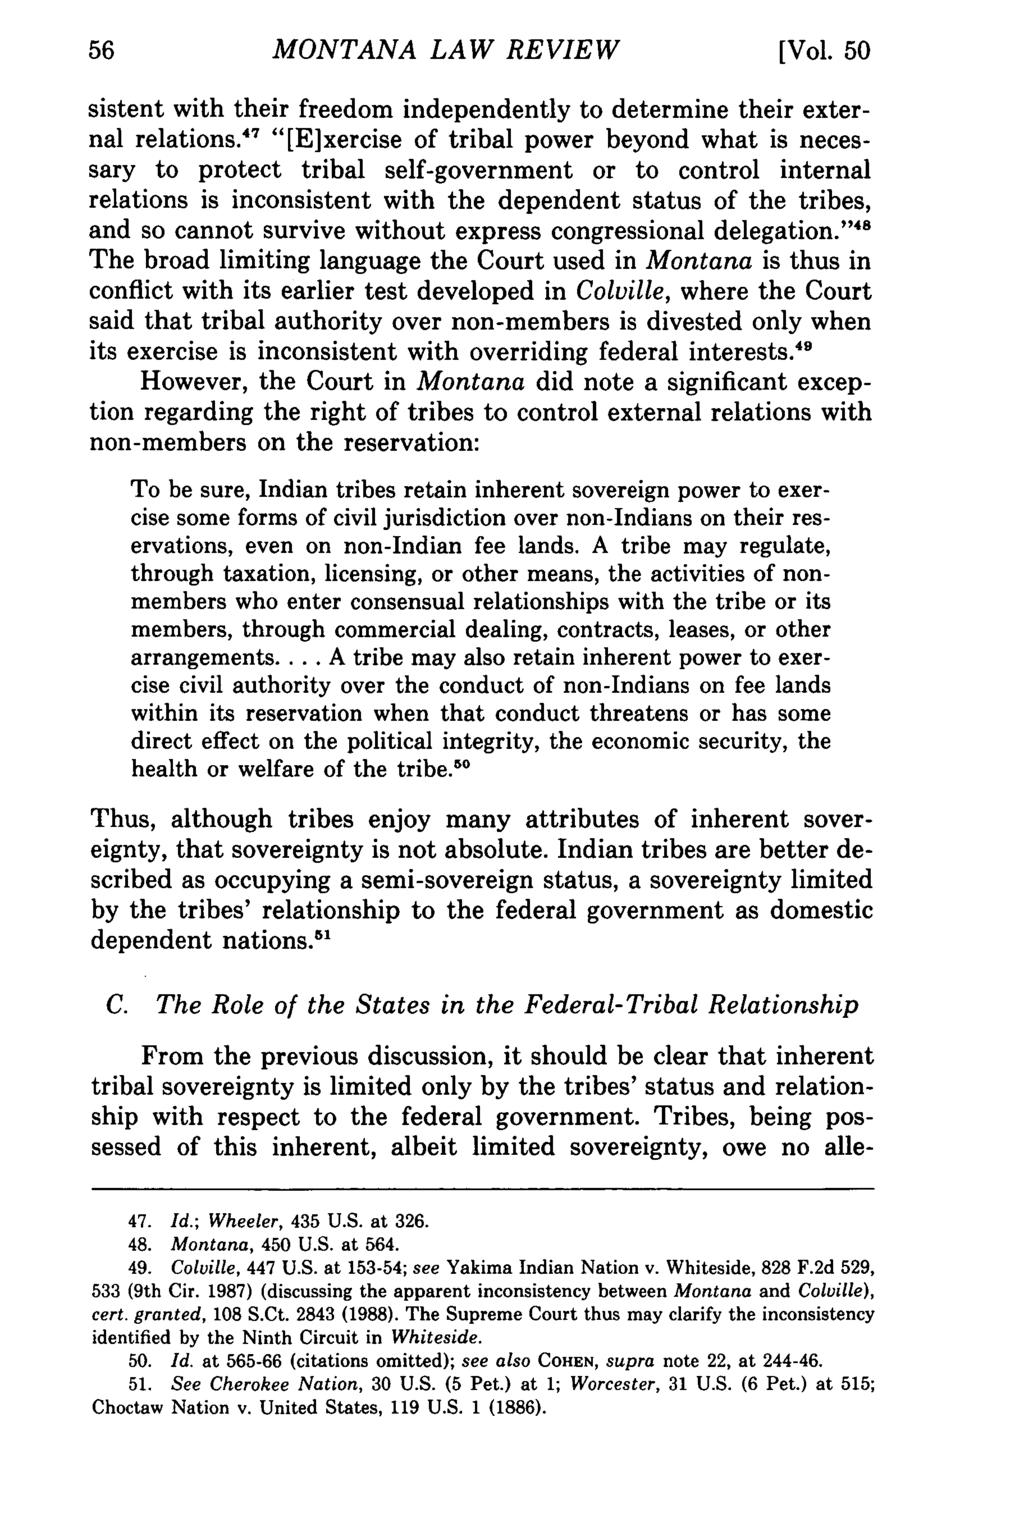 MONTANA Montana Law Review, LAW Vol. REVIEW 50 [1989], Iss. 1, Art. 3 [Vol. 50 sistent with their freedom independently to determine their external relations.